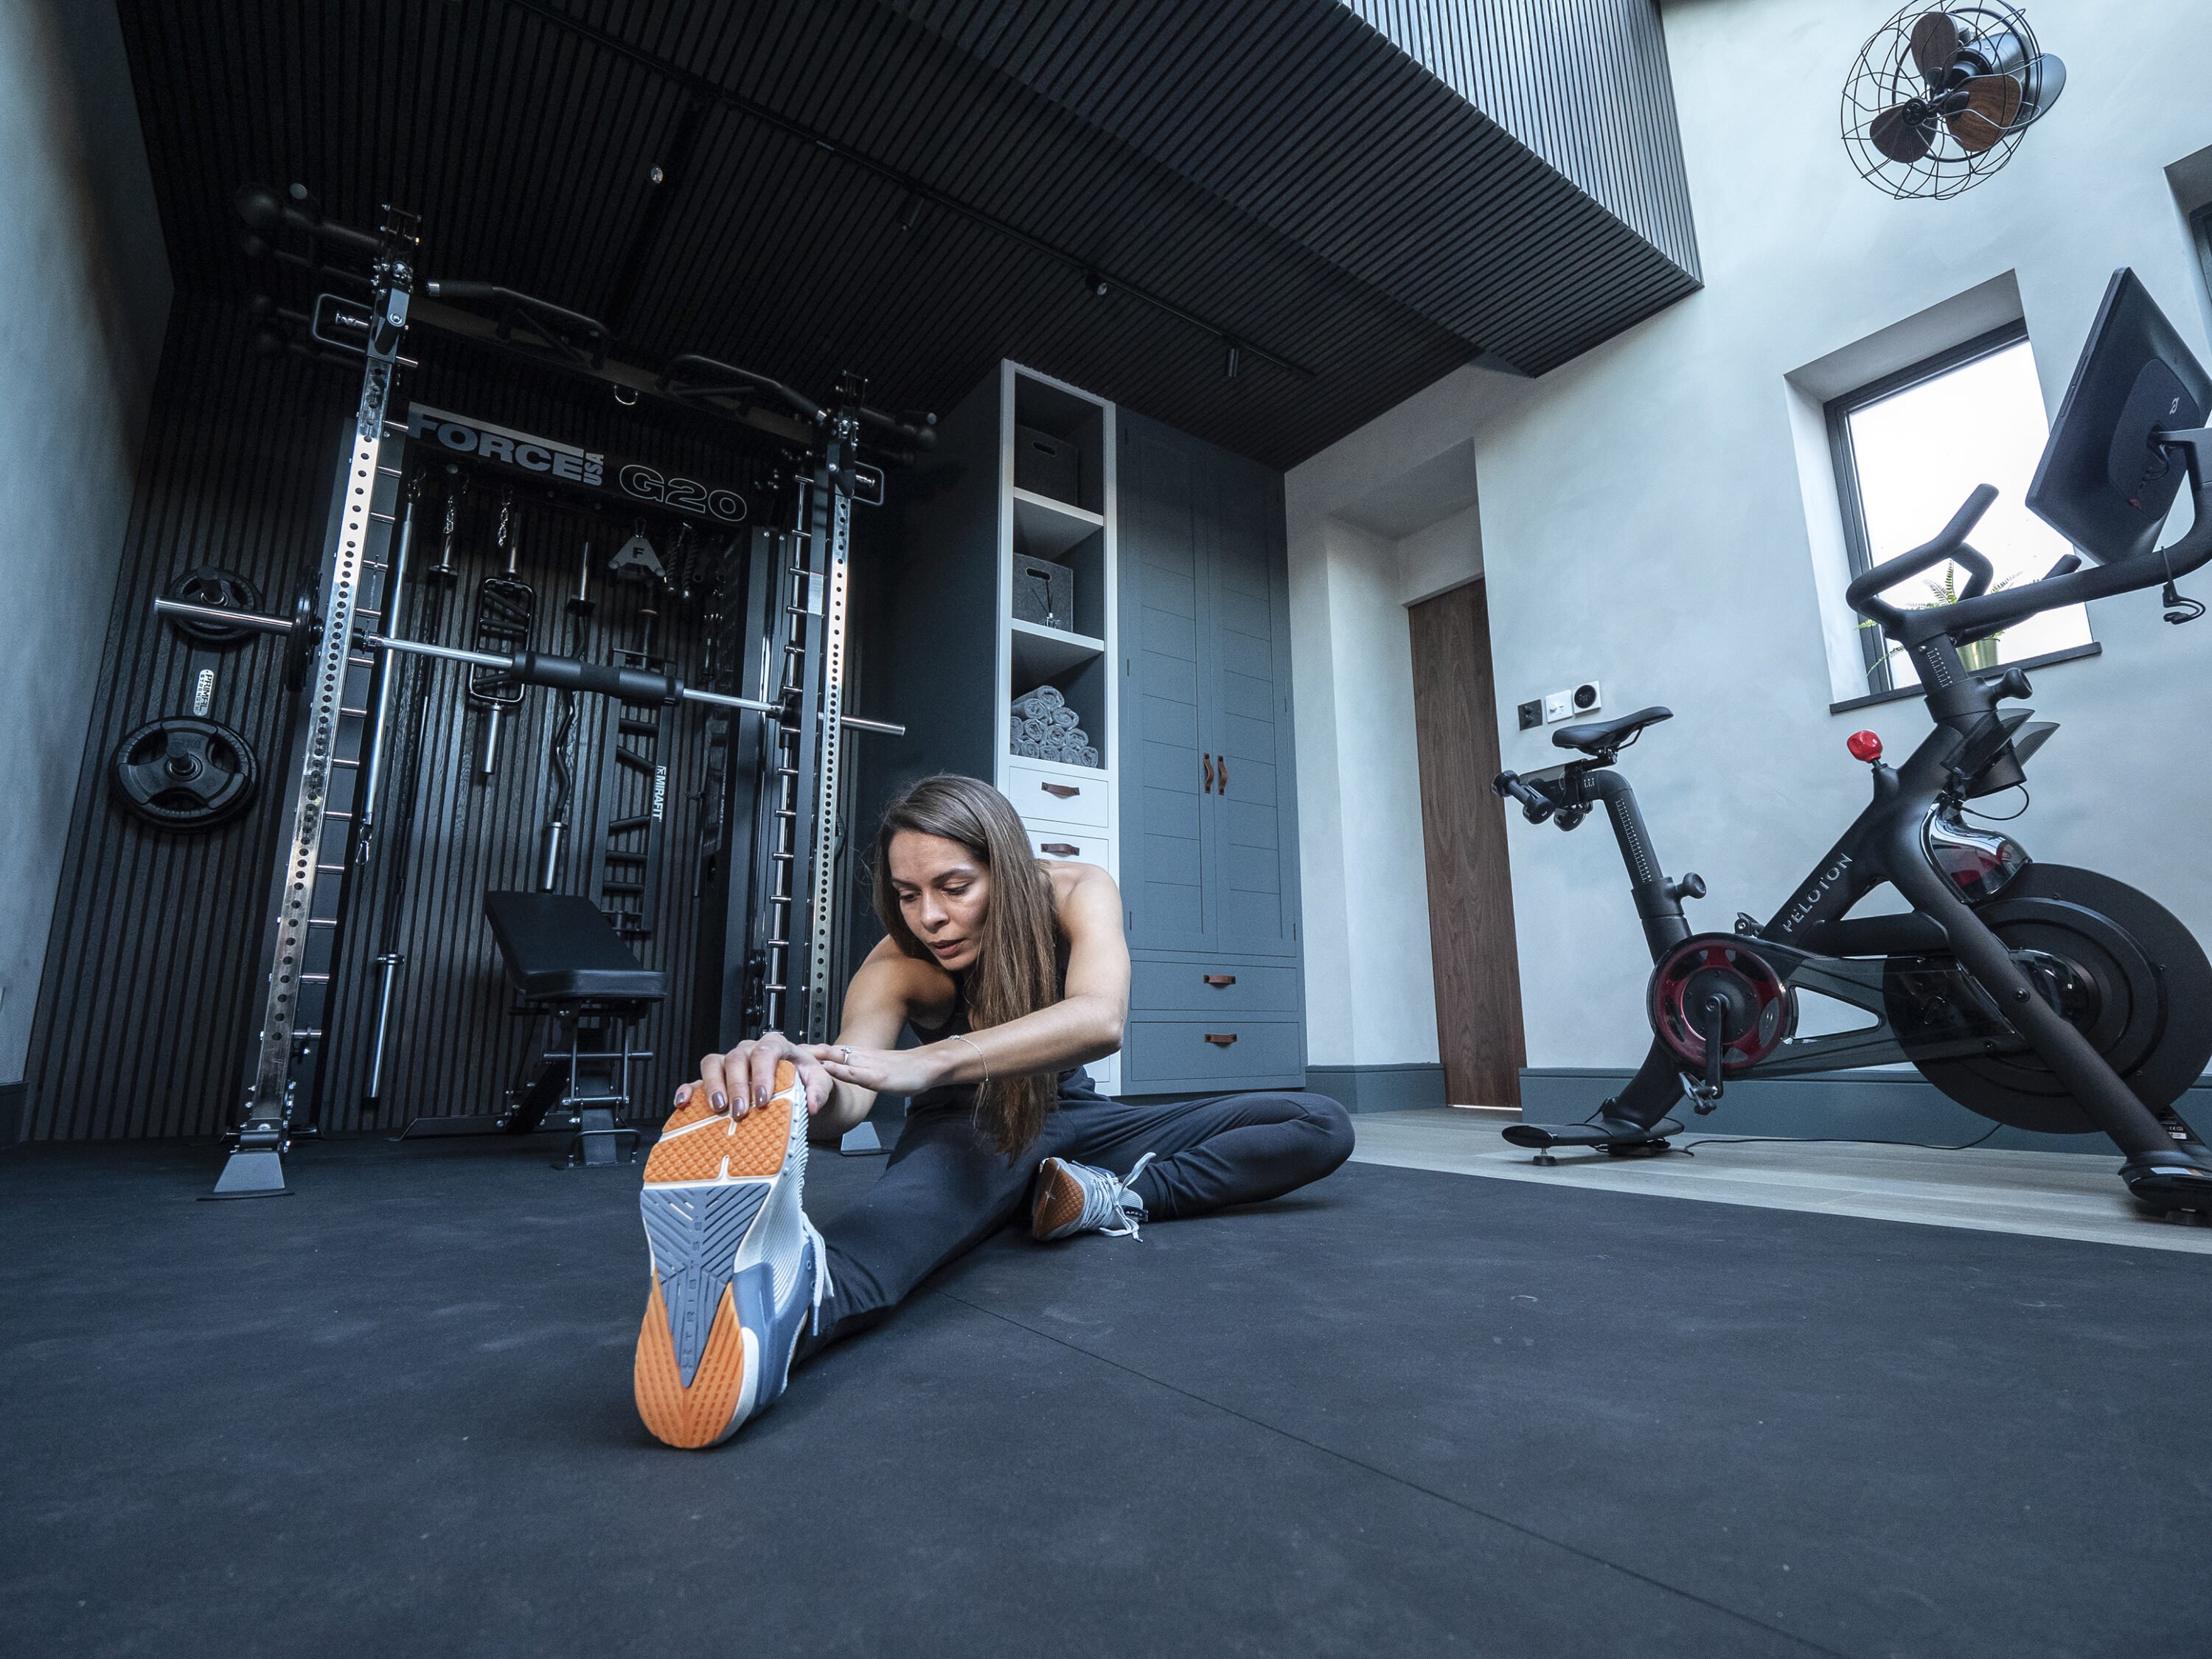 Sumptuous Home Gyms Are The Latest Design Luxury Amid Covid-19